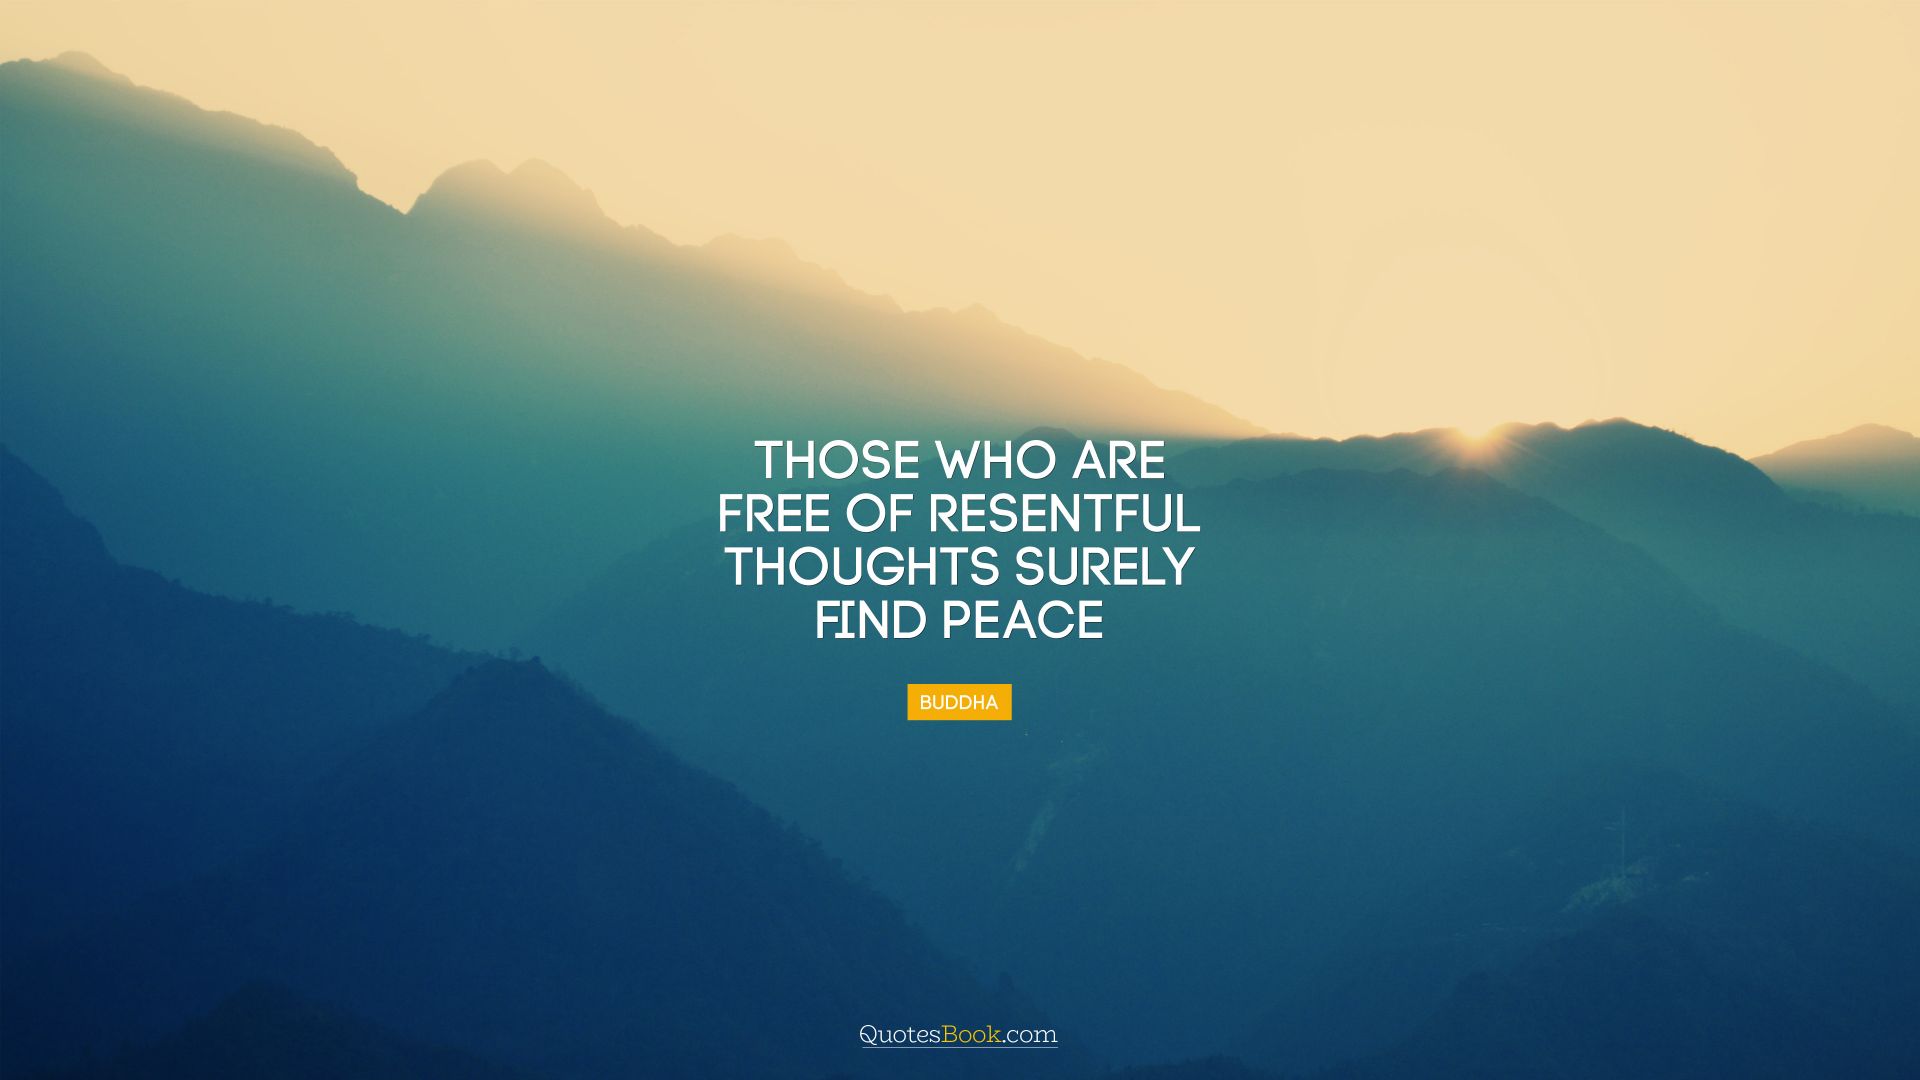 Those who are free of resentful thoughts surely find peace. - Quote by Buddha